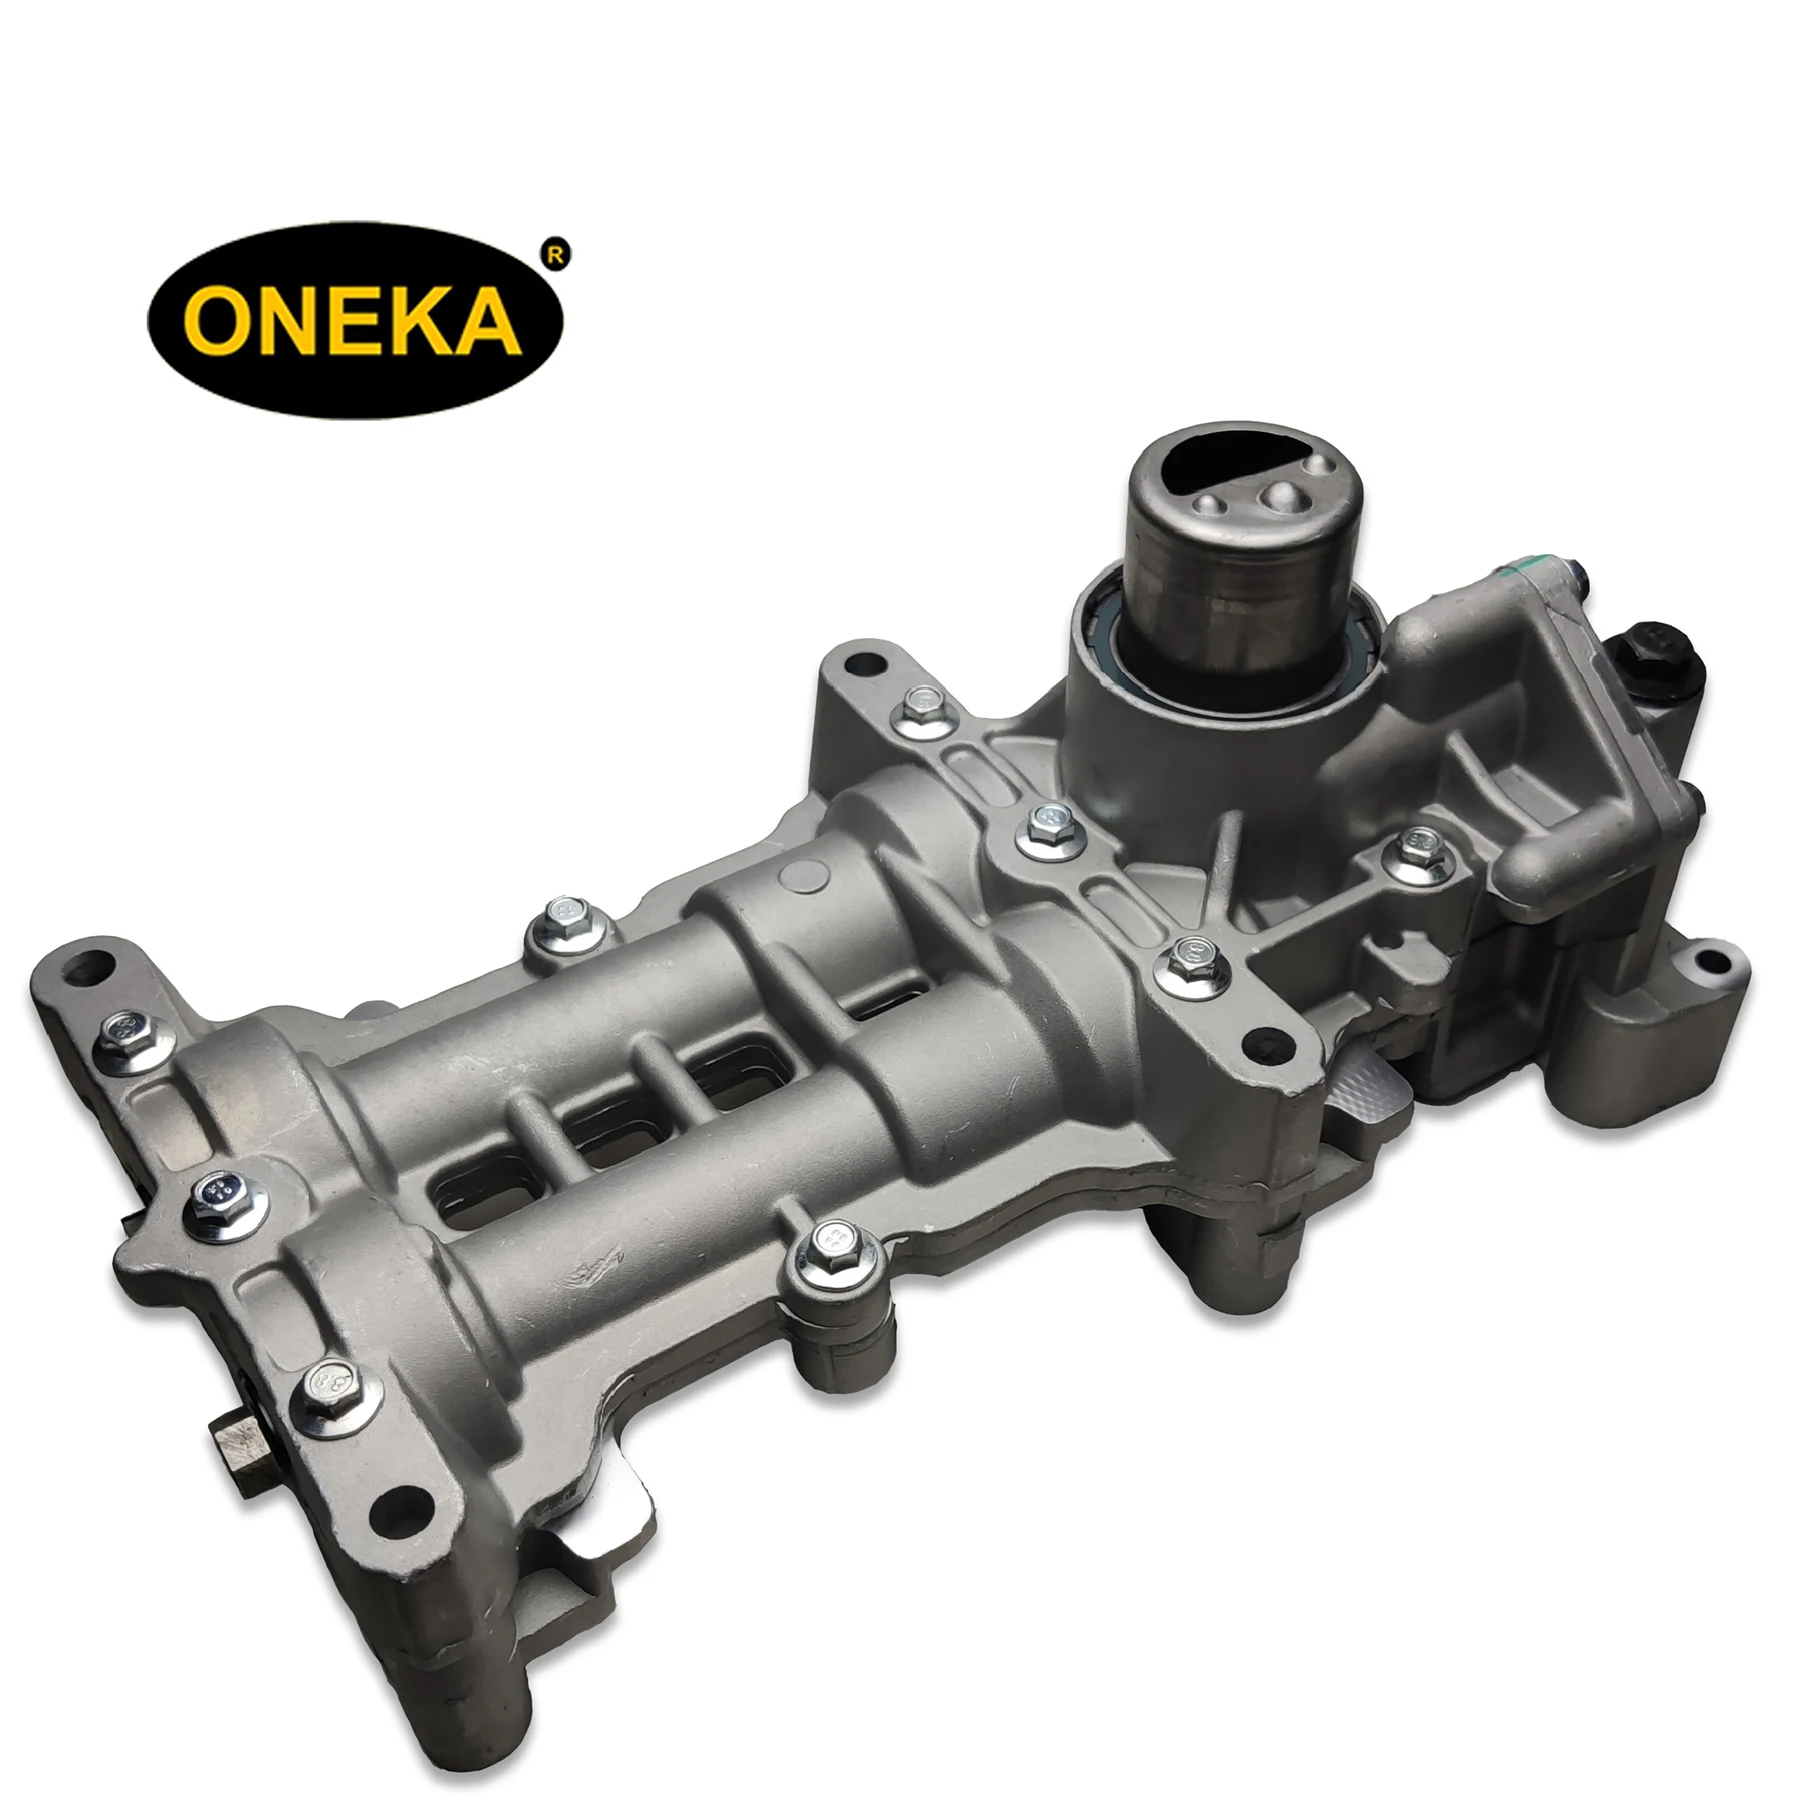 ZENITHIKE M525 Engine Oil Pump Fit for 2012-2015 for Nissan NV3500 